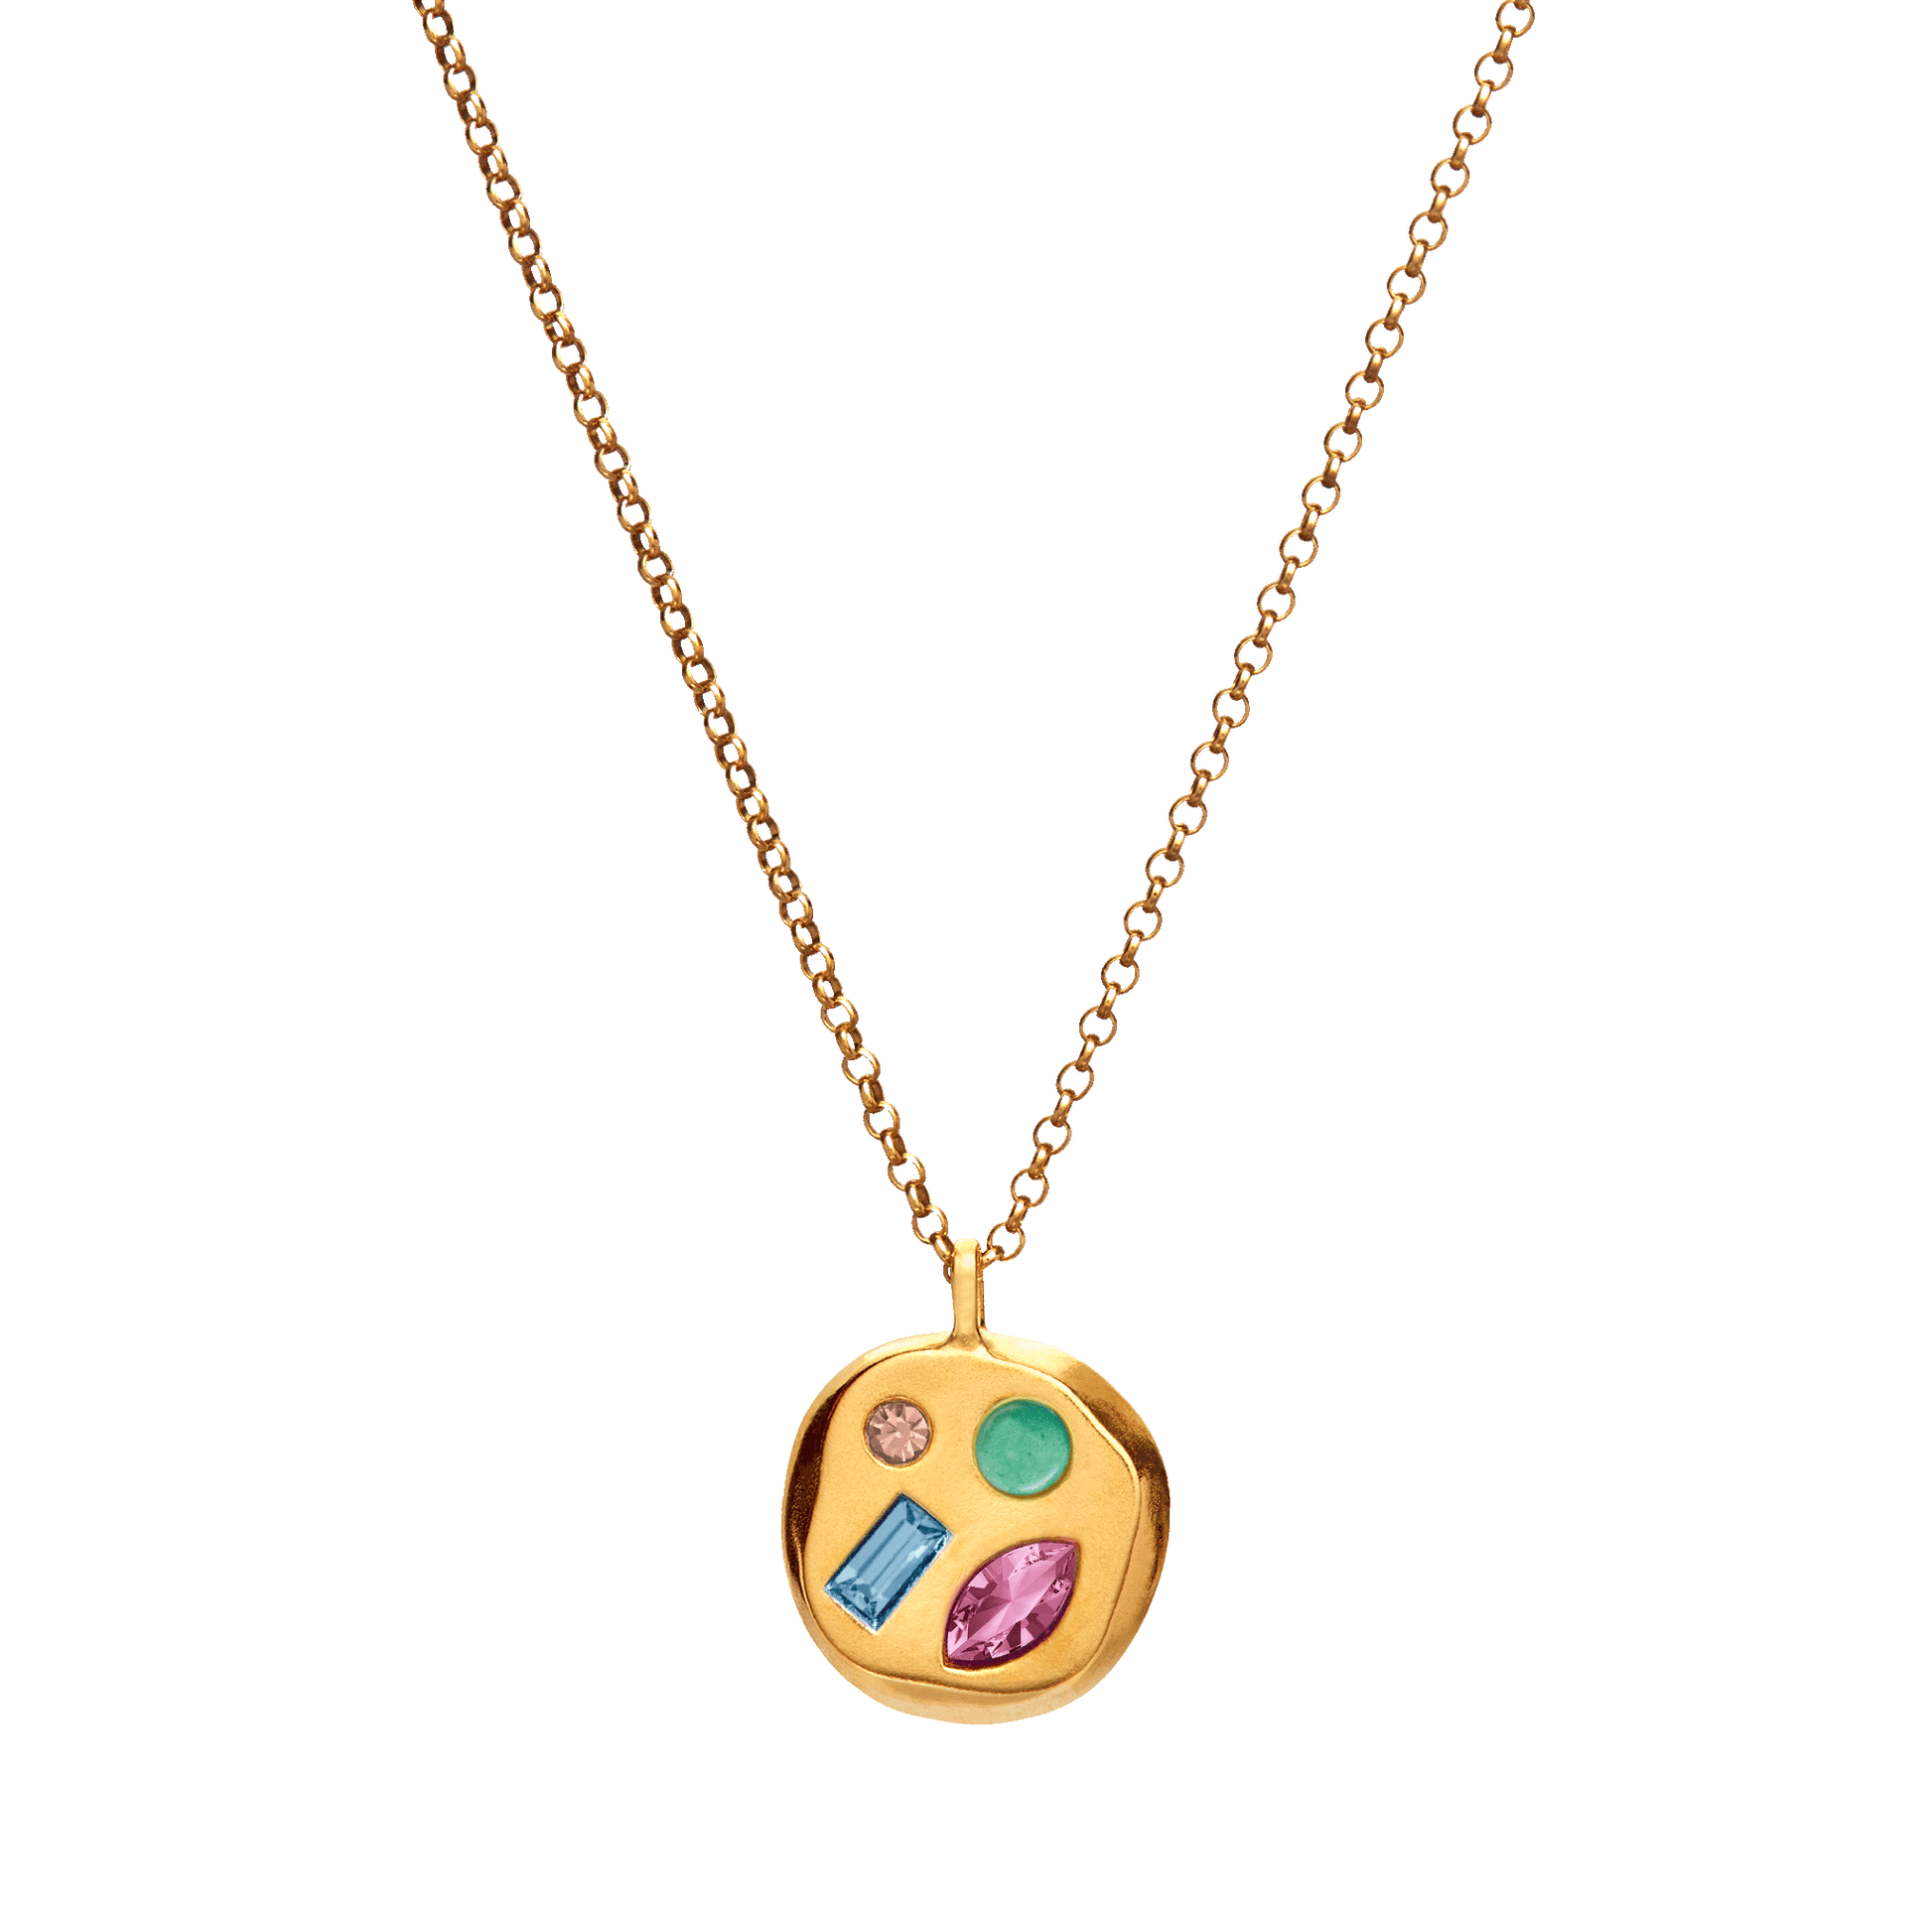 The October Seventh Pendant